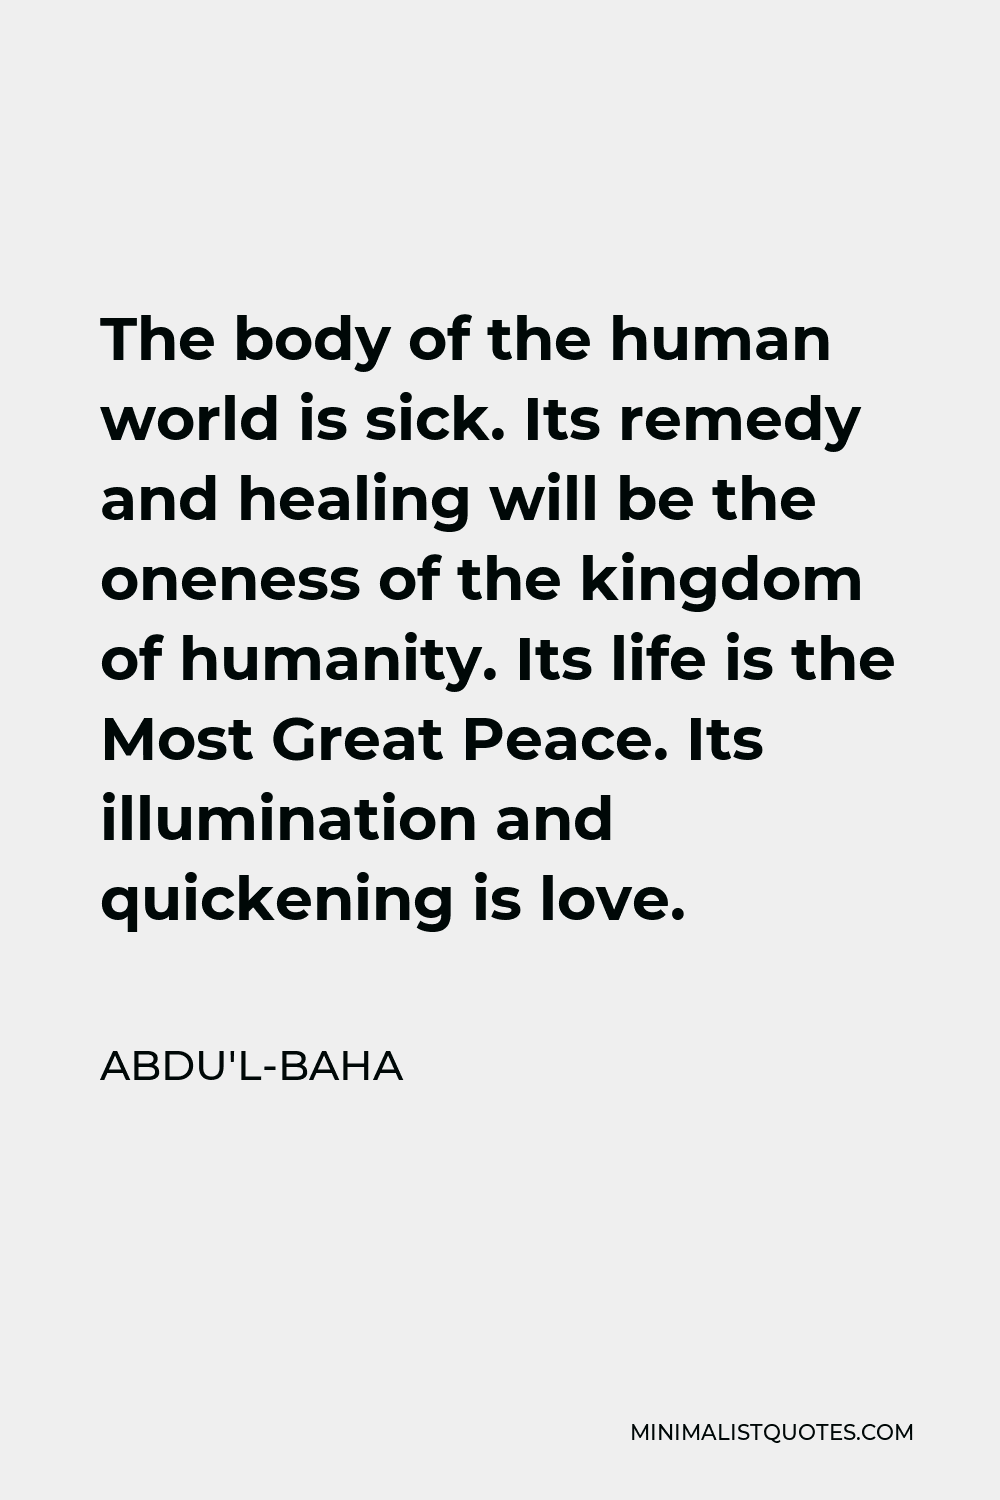 Abdu'l-Baha Quote - The body of the human world is sick. Its remedy and healing will be the oneness of the kingdom of humanity. Its life is the Most Great Peace. Its illumination and quickening is love.